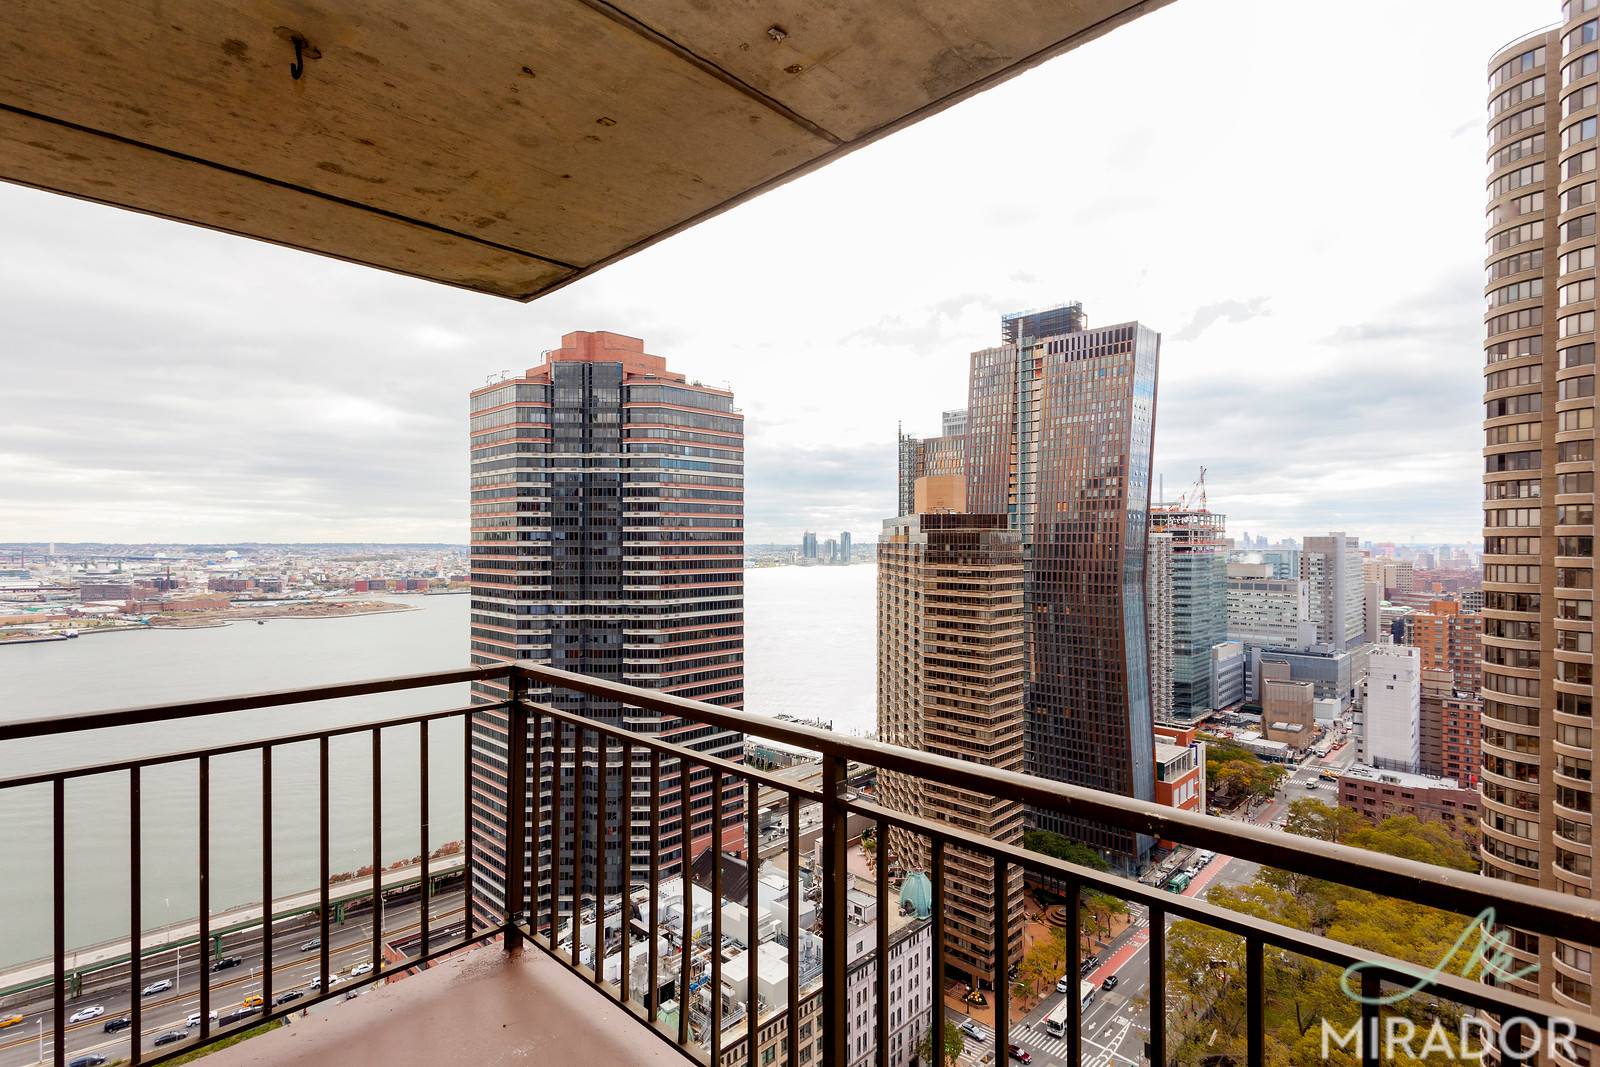 34th floor South facing renovated 2 bedroom, 1.